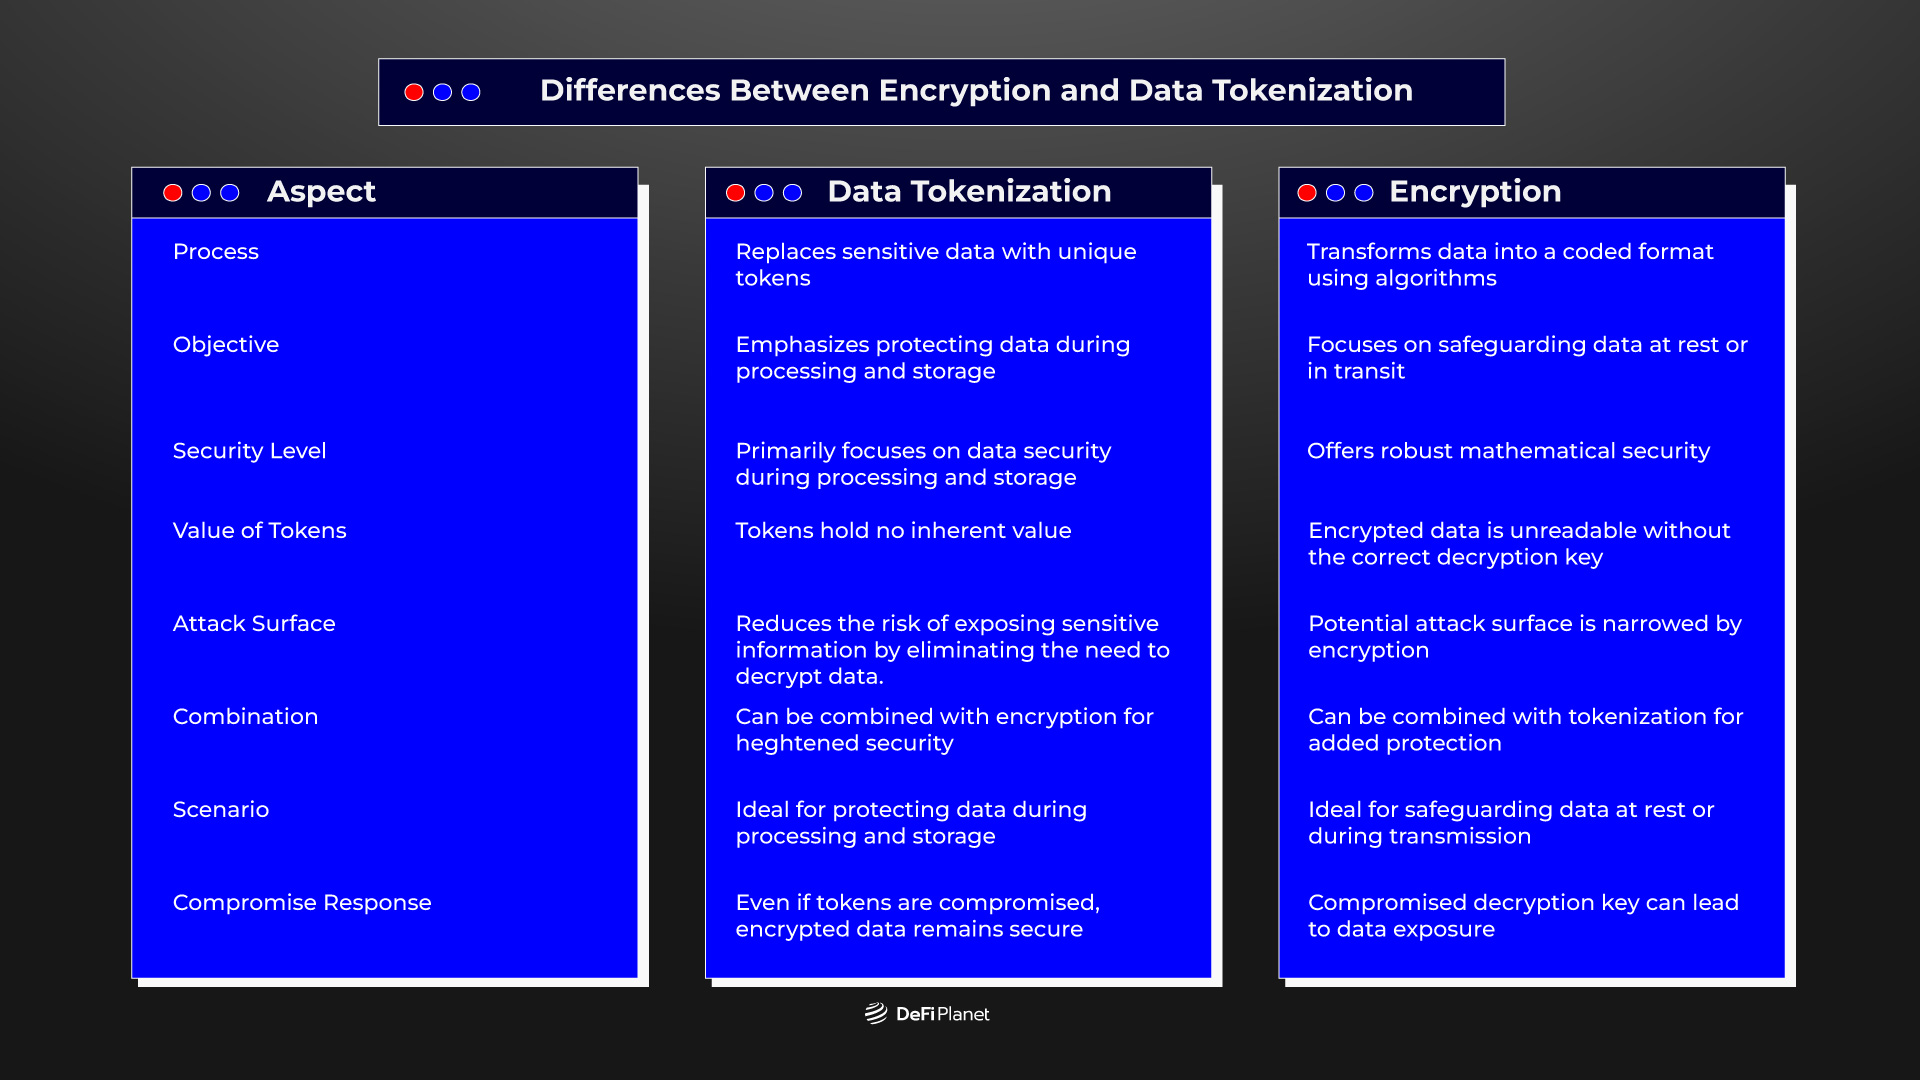 Table showing the Differences Between Encryption and Data Tokenization on DeFi Planet